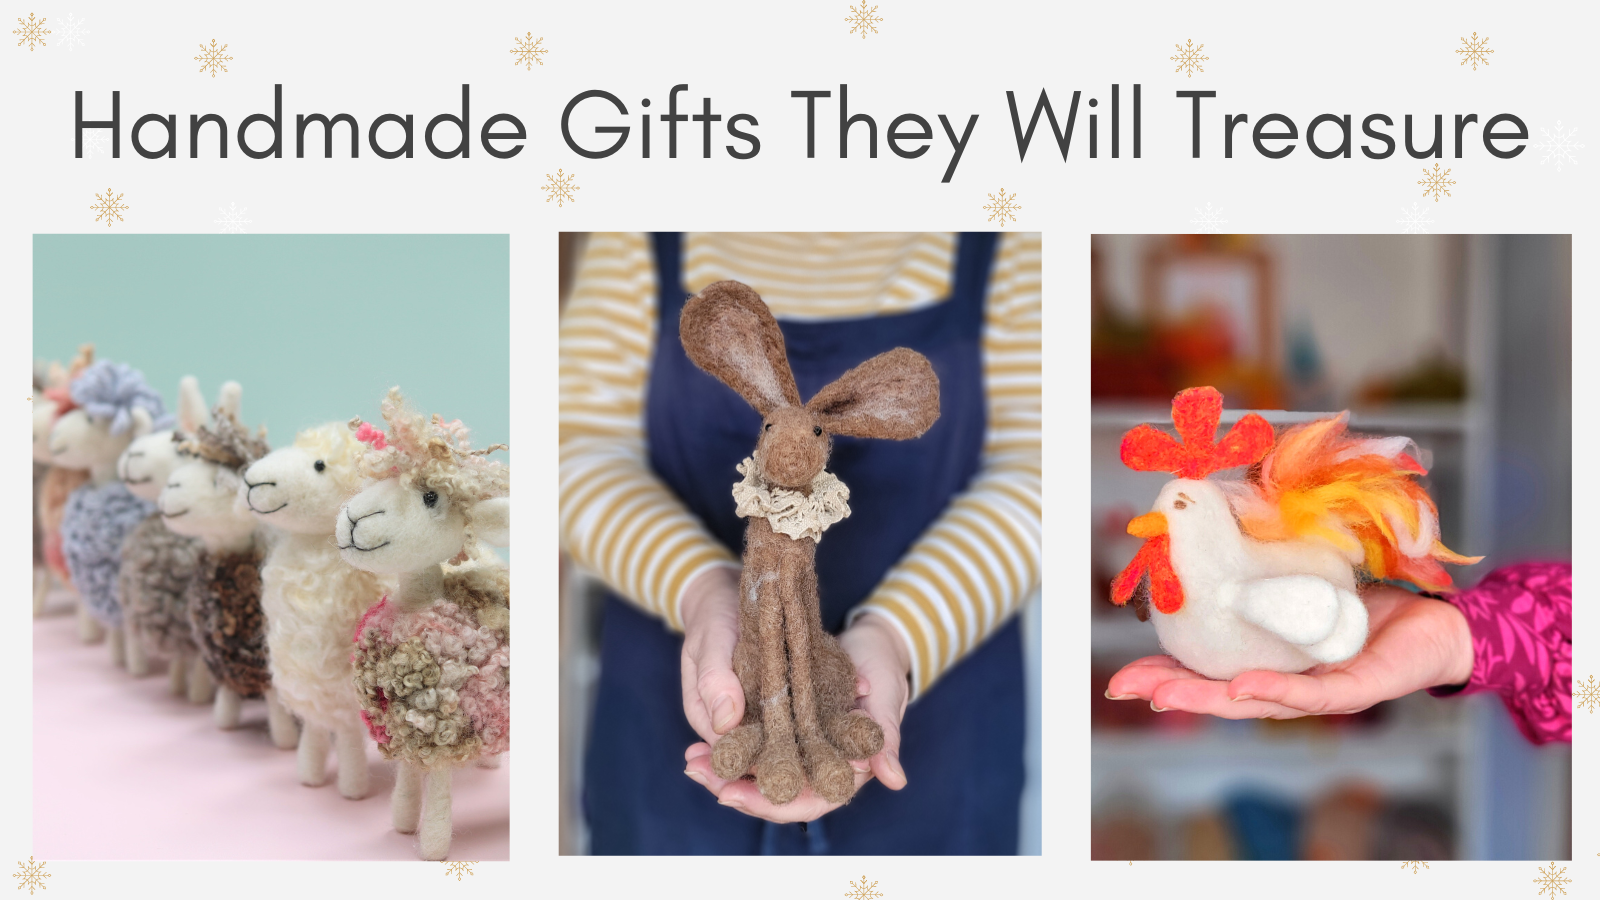 Image shows pictures of needle felting kit animals: chicken, hare and sheep. Text reads: Handmade gifts they will treasure